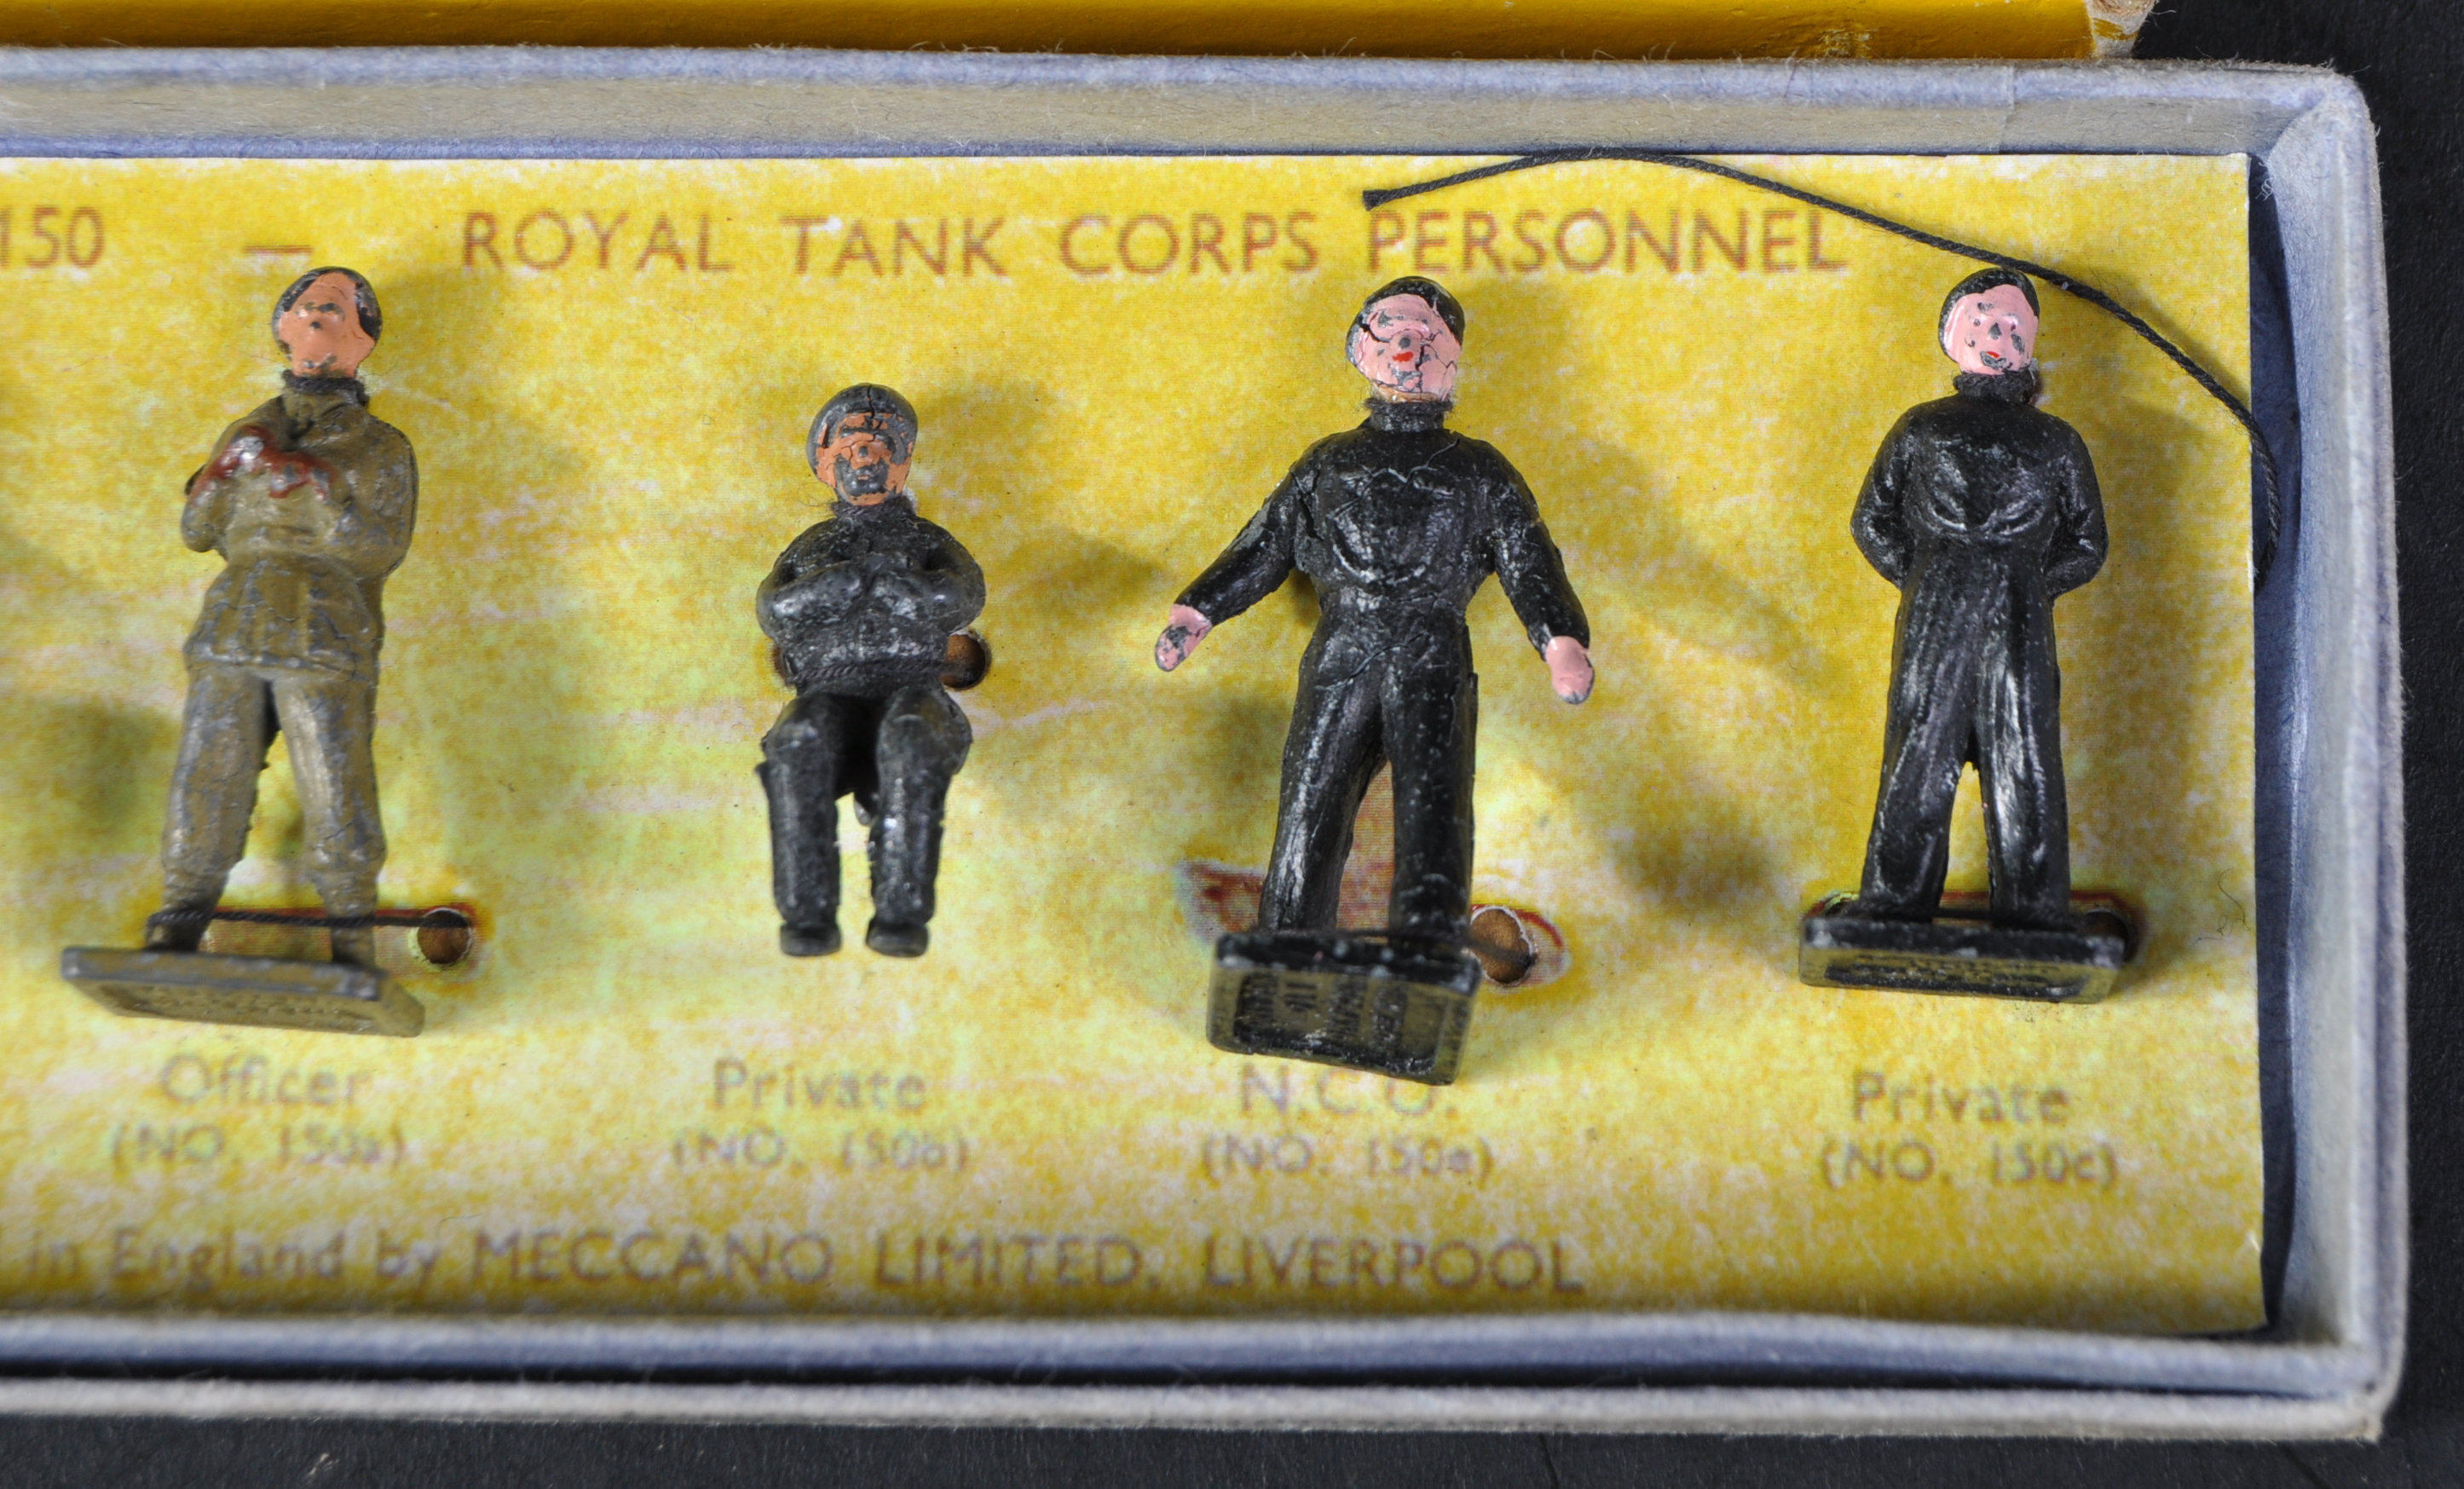 VINTAGE DINKYS TOYS DIECAST MILITARY PERSONNEL FIGURES - Image 4 of 5